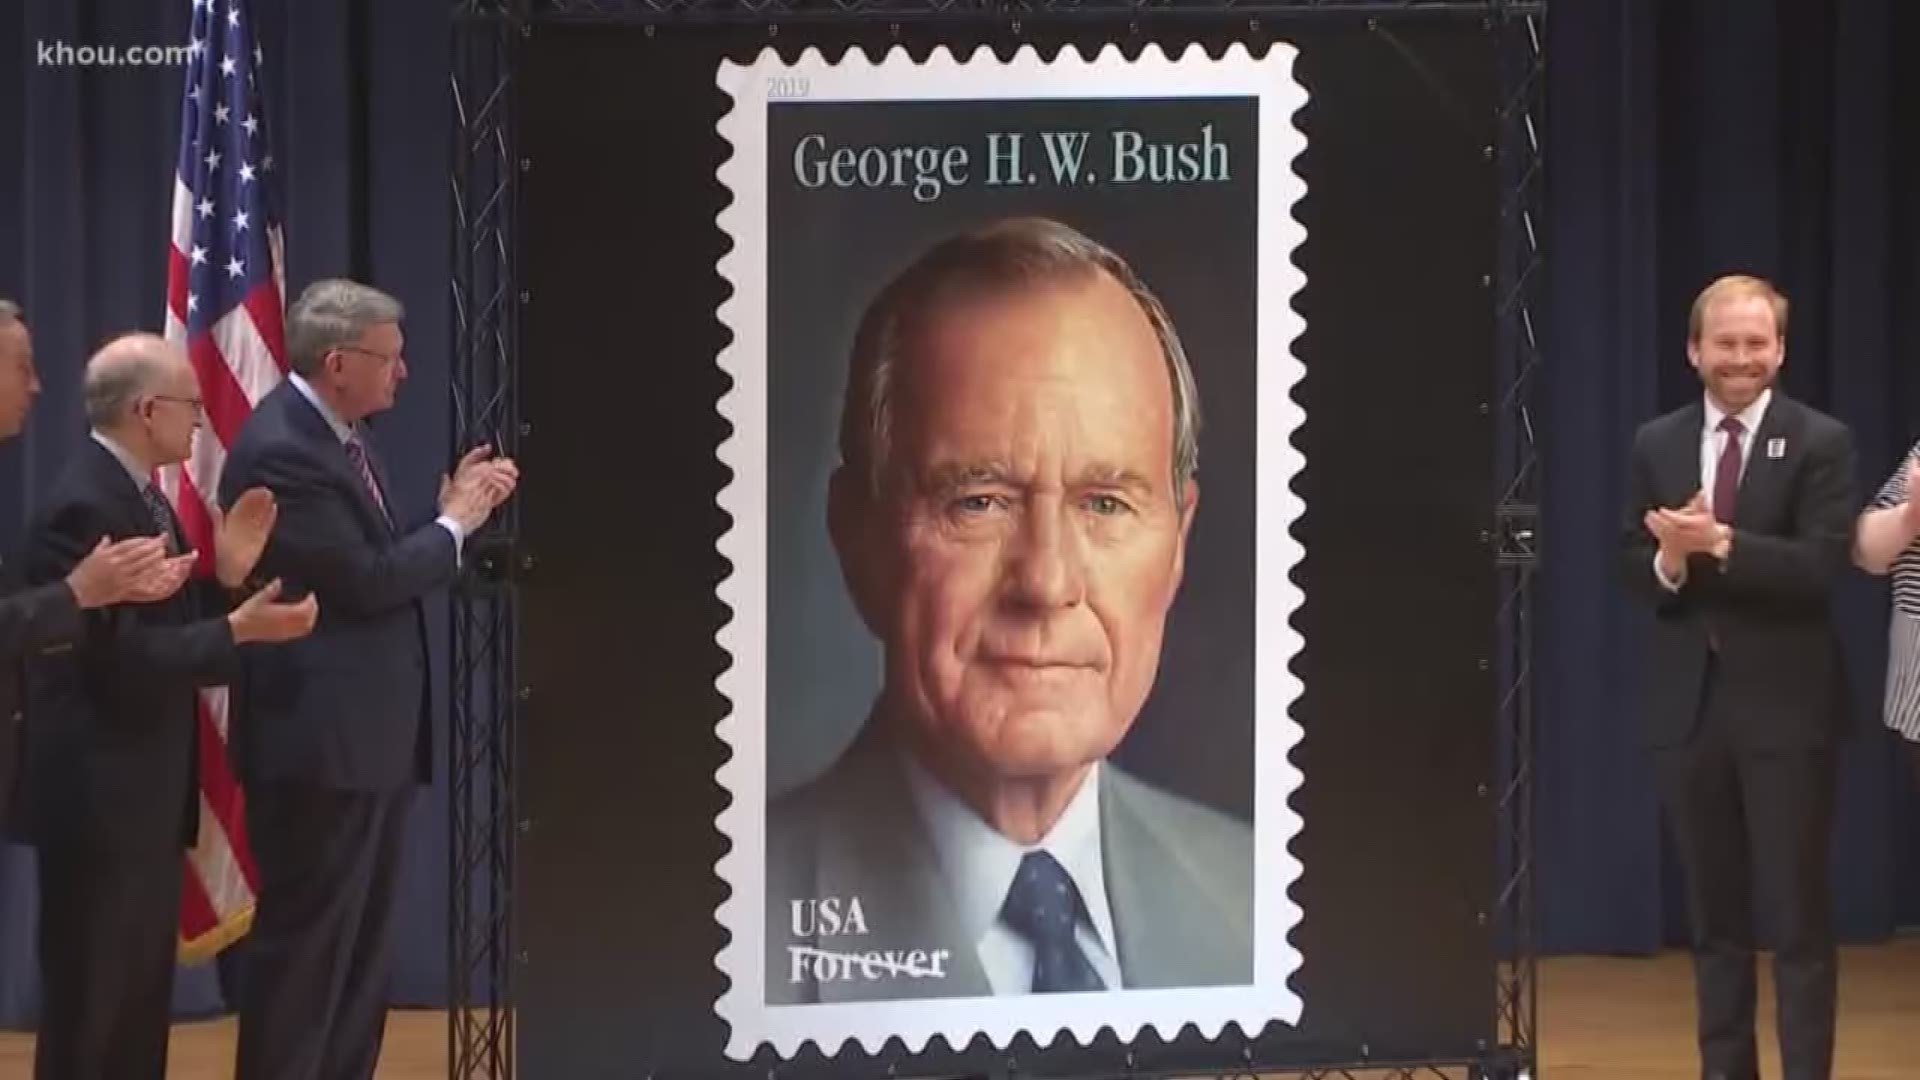 June 12 would have been former President George H. W. Bush’s 95th birthday. To honor his memory, it was also the first day of issue of his Forever stamp. Those closest to him say it was a fitting tribute, because of 41’s love of handwritten letters.